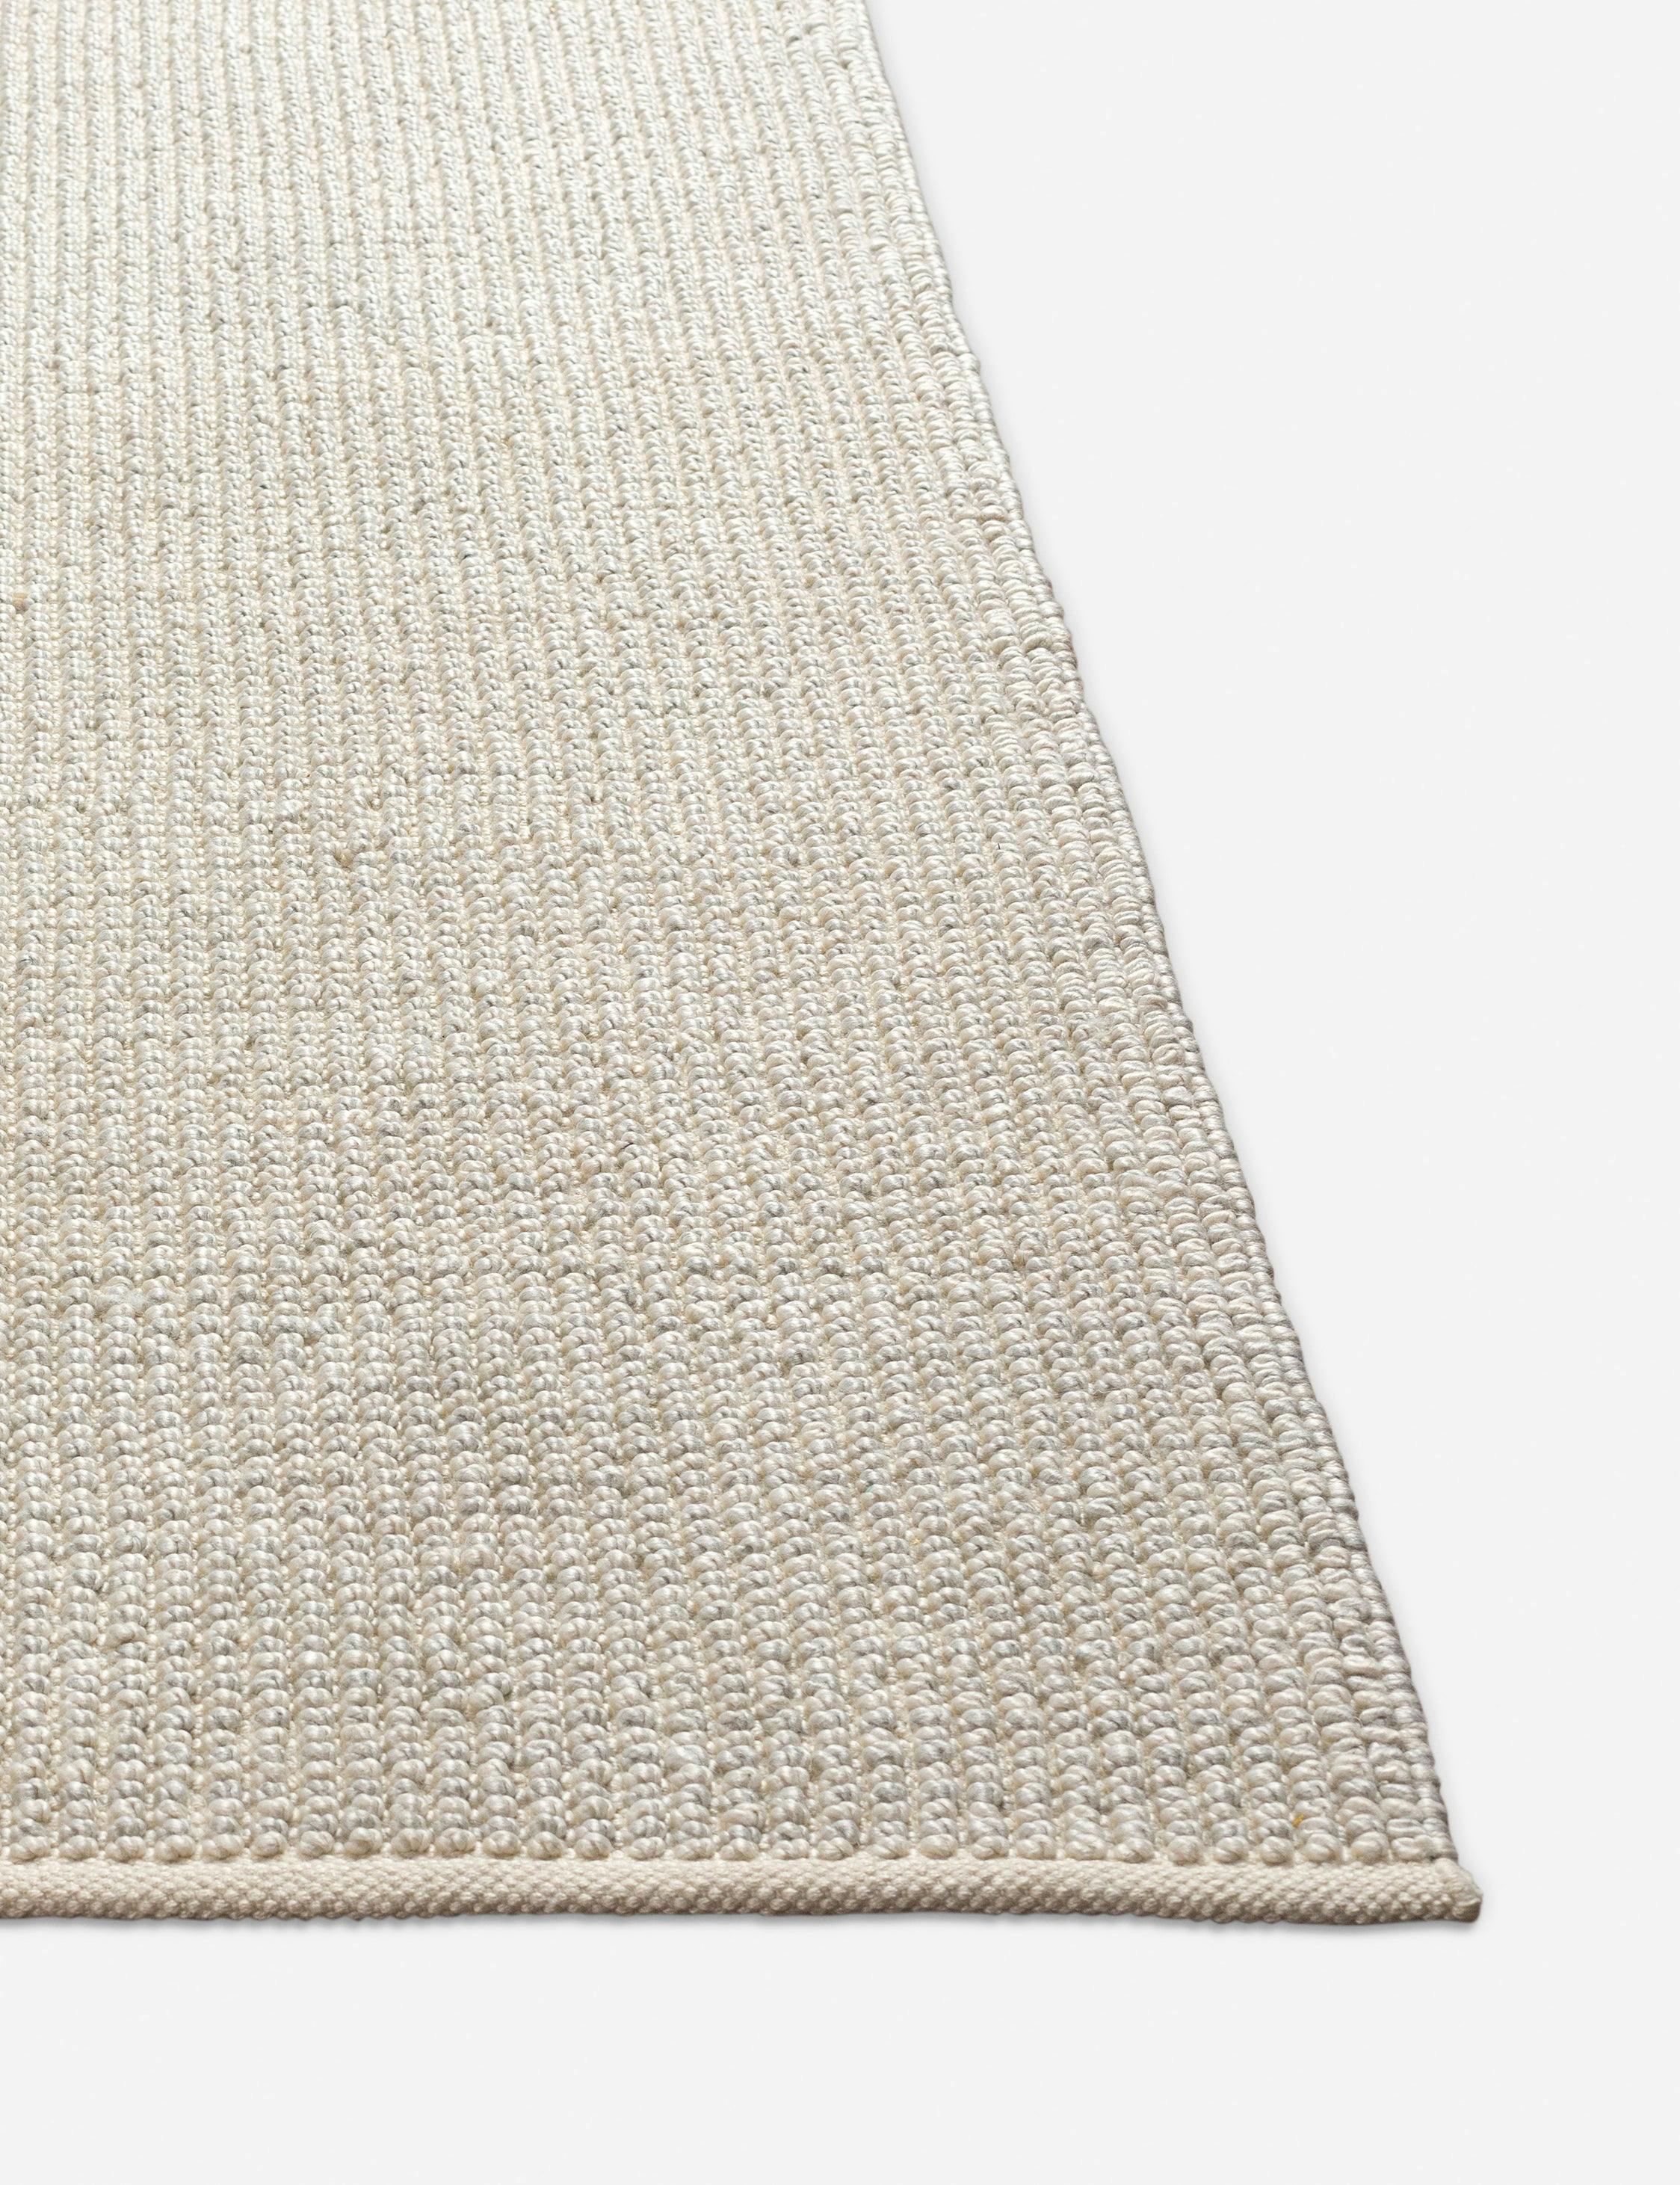 Eco-Friendly Handwoven Gray Spot Rug 5' x 7' - Easy Care